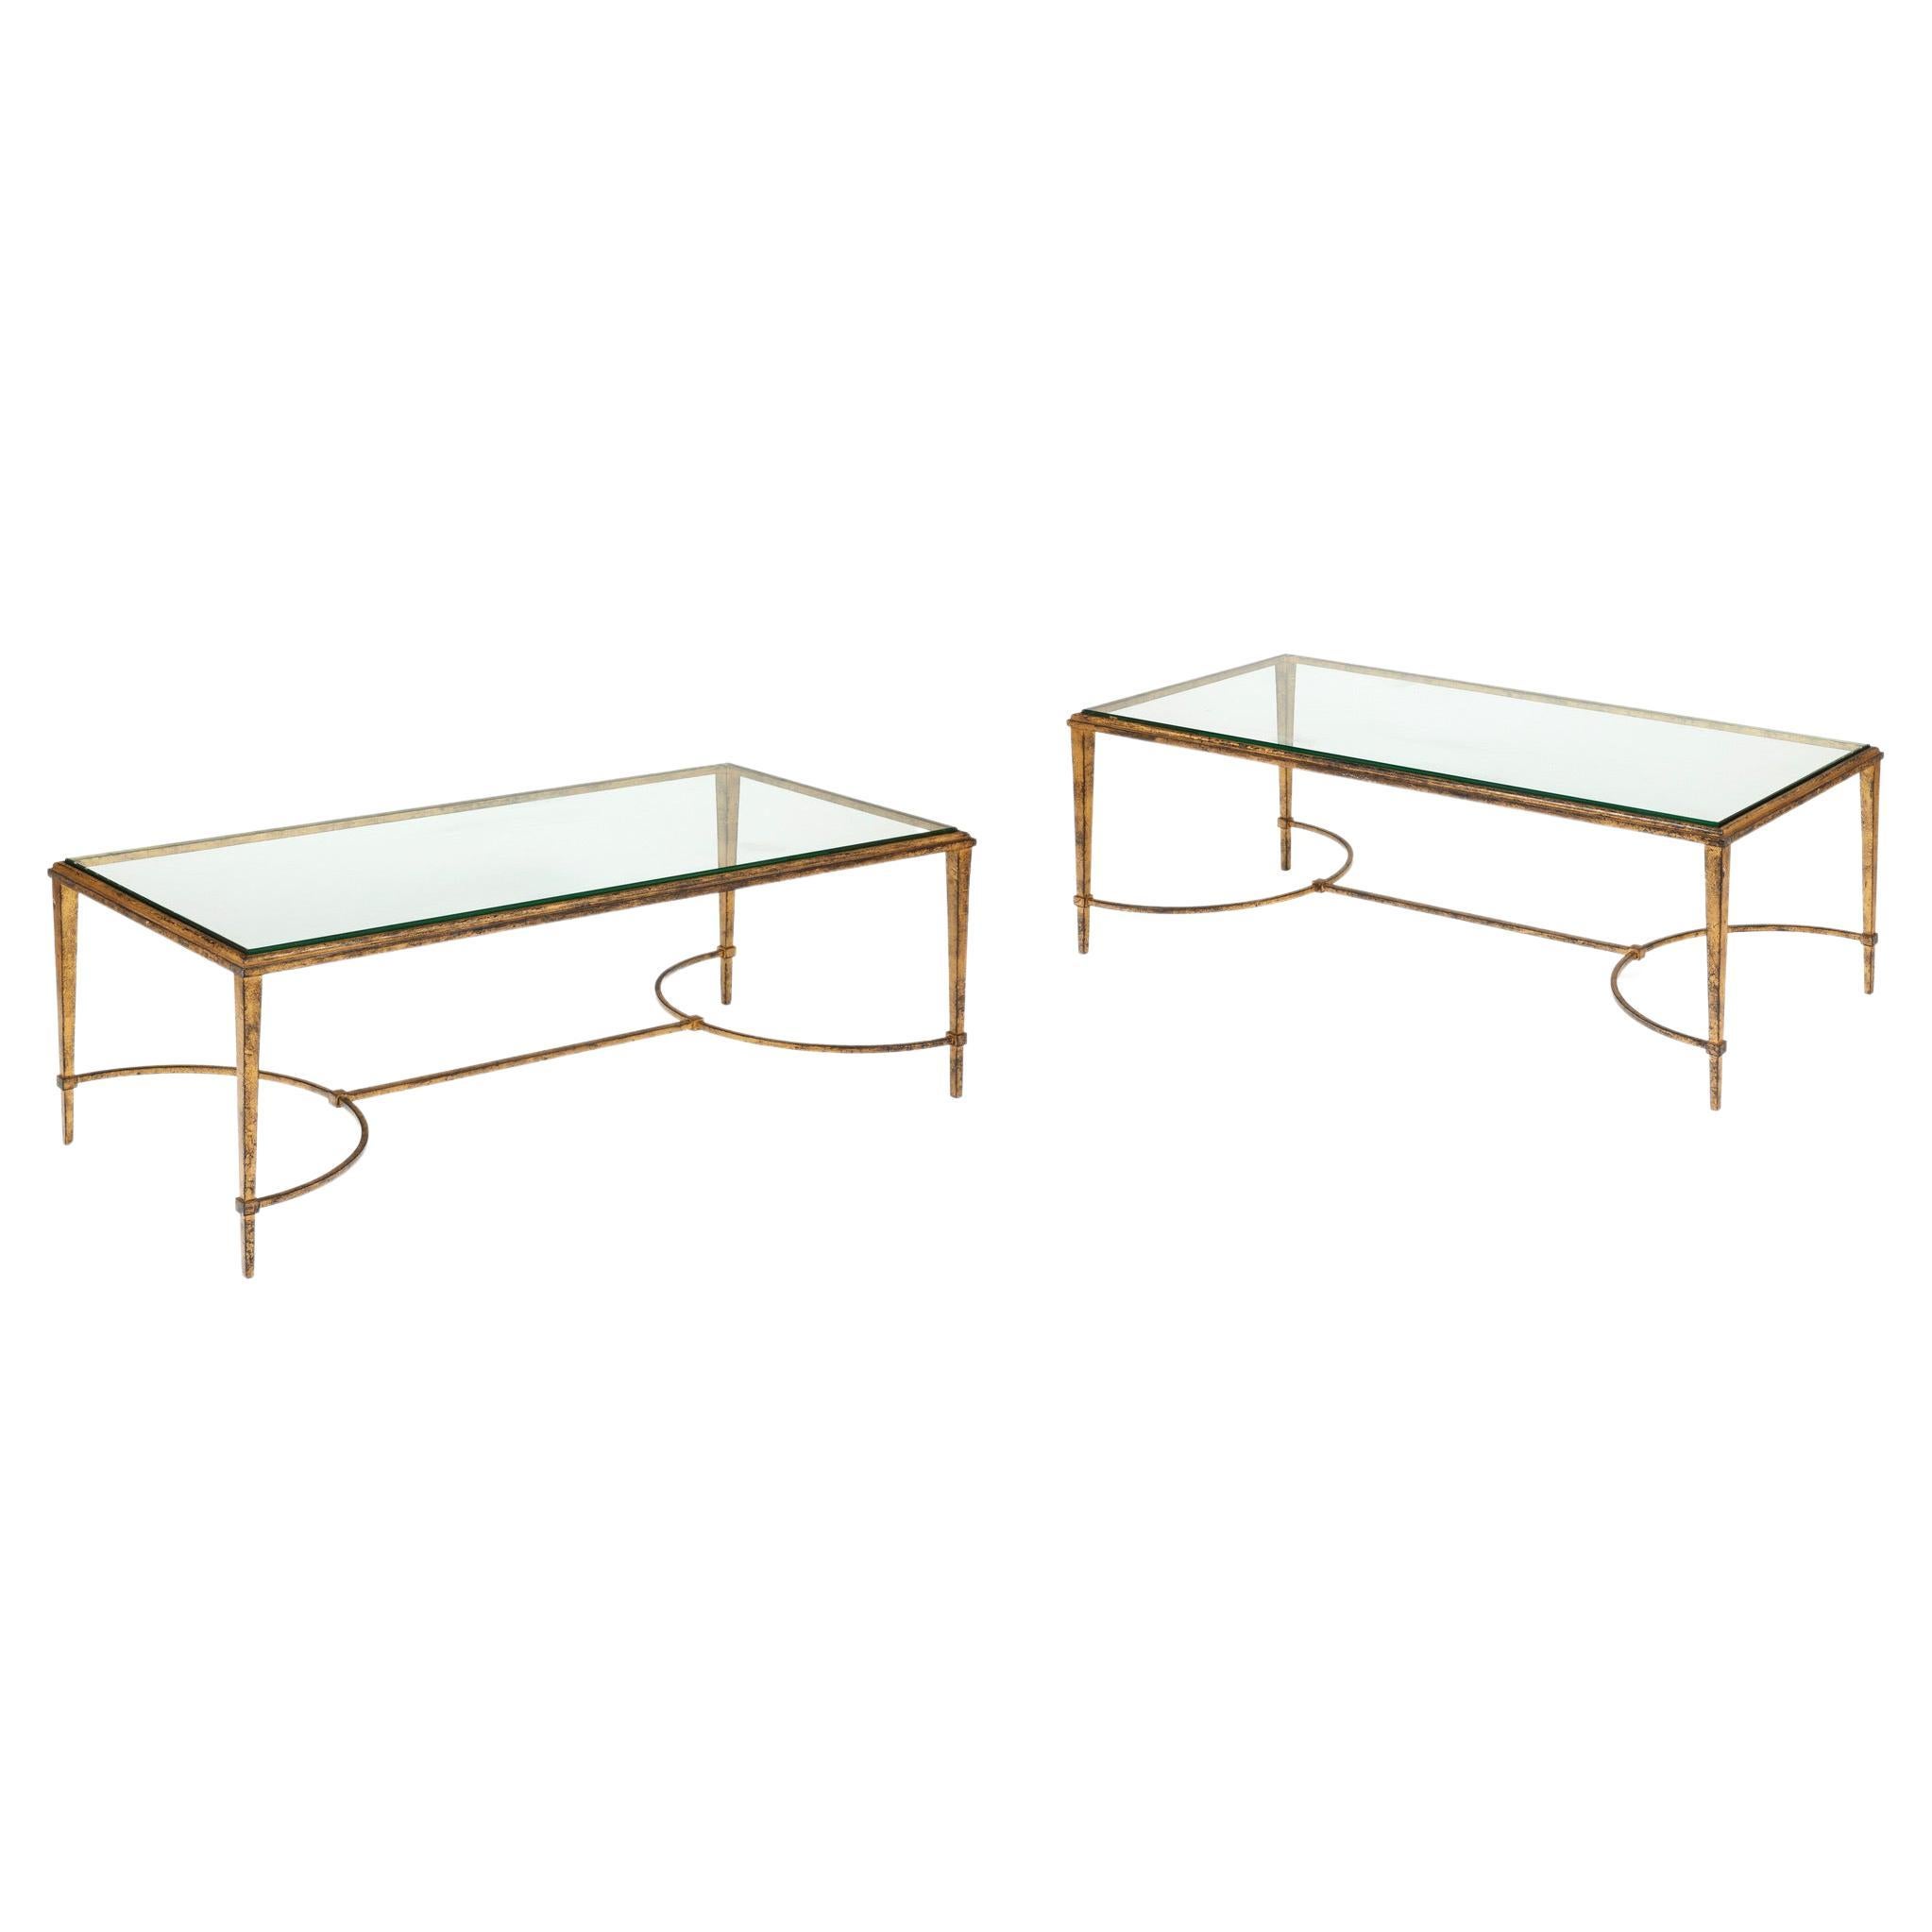 Coffee table in gilded wrought iron with a rectangular glass slab top on a corner base with tapered legs and a double arch brace. A pair is available.
Origin : Lee Bouvier Radziwill's collection.